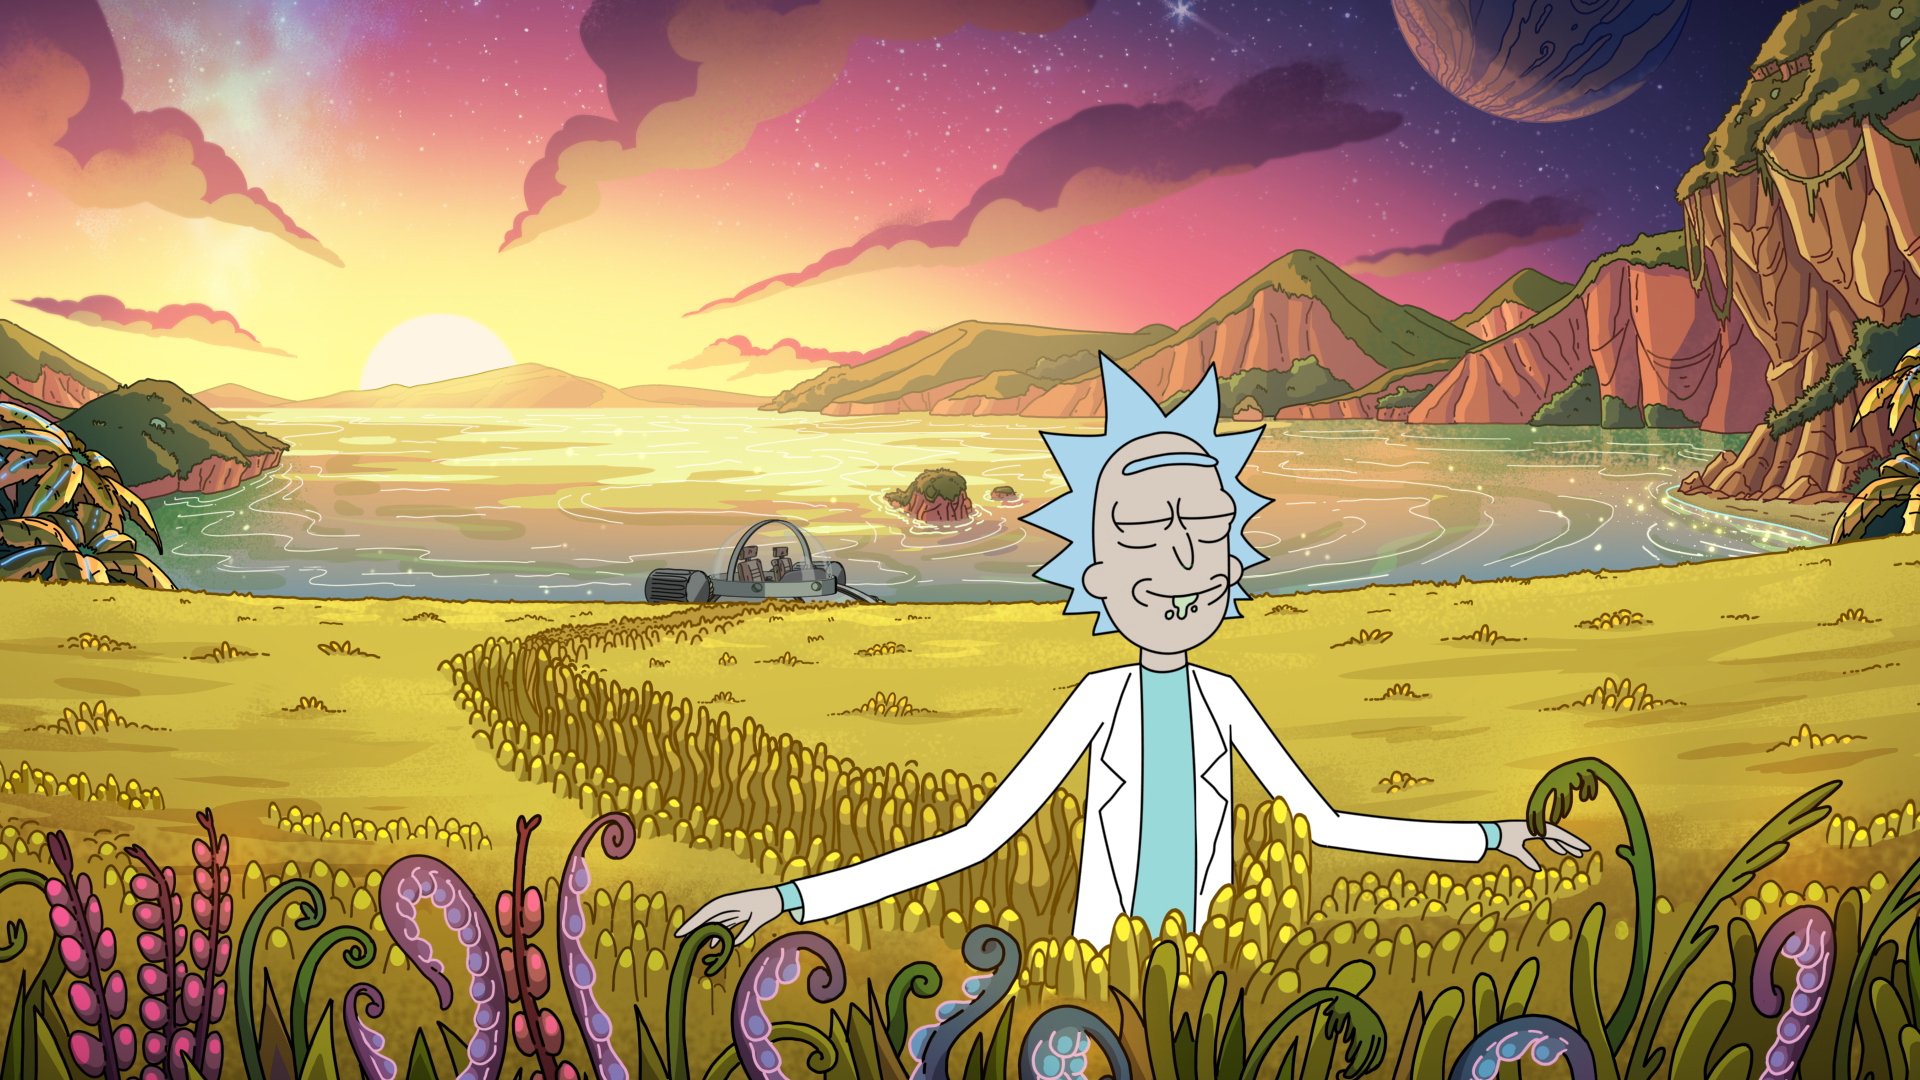 ‘Rick and Morty’ Season 5 Hulu and HBO Max Release Date Confirmed — Here’s When Fans Can Watch New Episodes